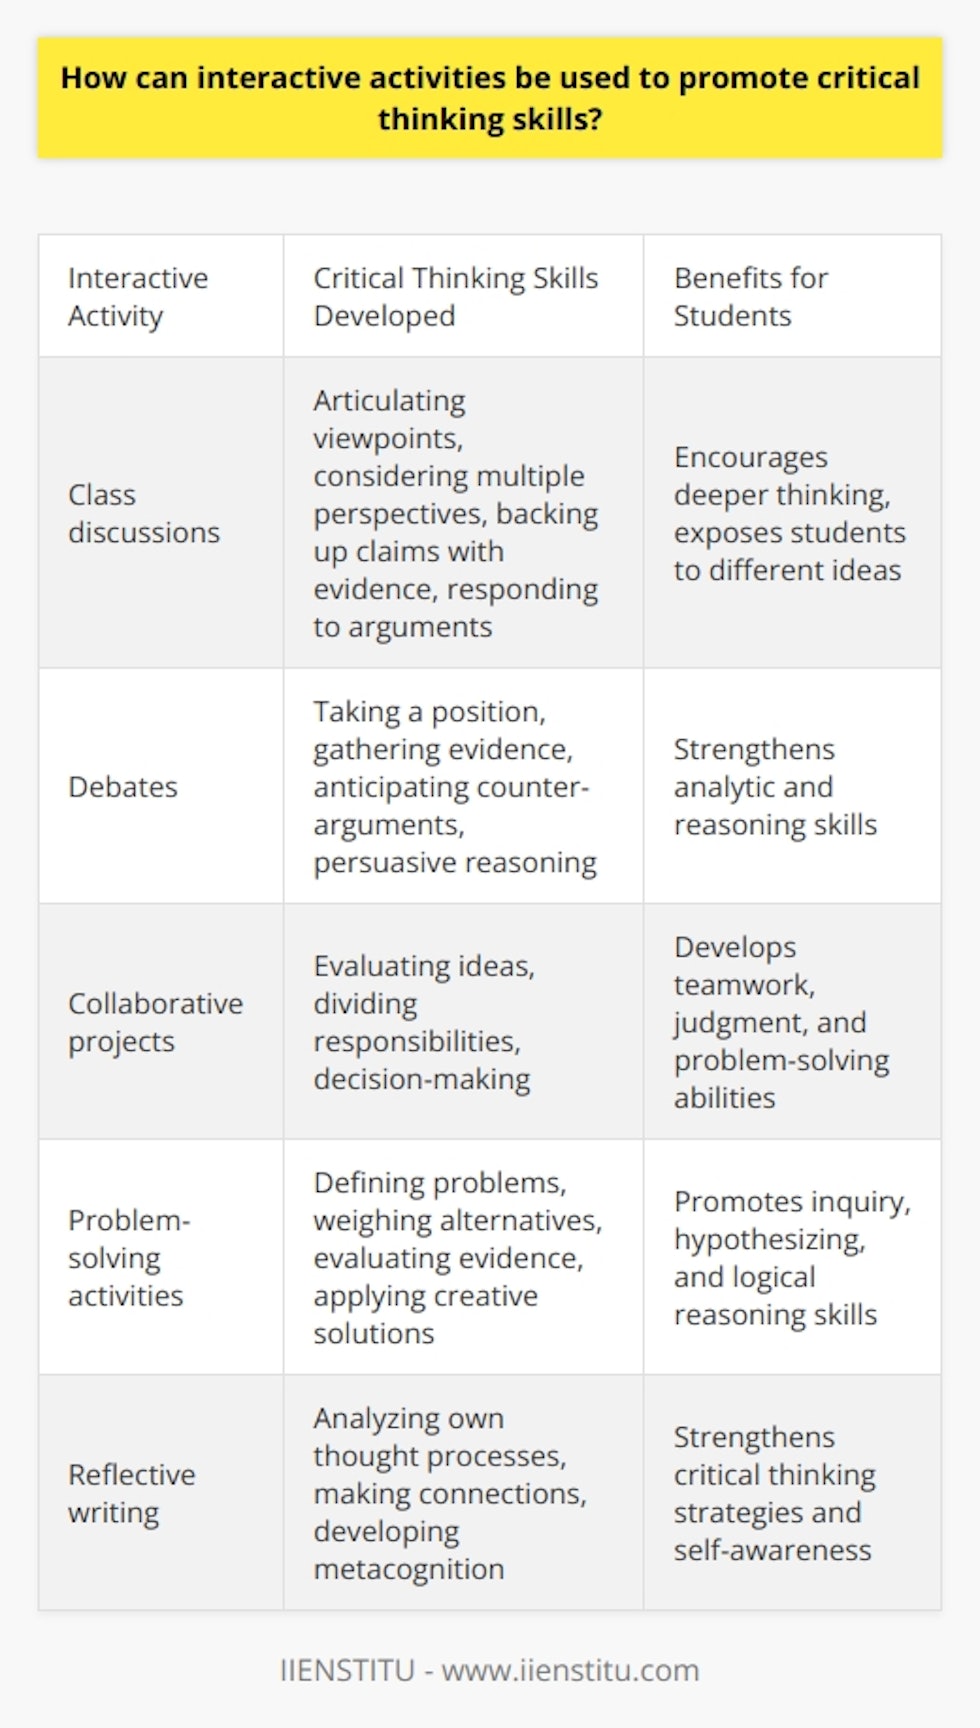 Here is some content on how interactive activities can promote critical thinking skills:Interactive activities provide opportunities for students to develop and practice critical thinking skills. Here are some ways teachers can use interactive learning to foster critical thinking:- Class discussions - Having students engage in discussions about academic topics or current events encourages them to articulate their viewpoints, consider multiple perspectives, back up claims with evidence, and respond to others' arguments. The teacher acts as a facilitator, pushing students to think more deeply.- Debates - Structured debates require students to take a position on an issue, conduct research to gather evidence, anticipate counter-arguments, and present a persuasive case. Developing lines of reasoning strengthens analytic skills.- Collaborative projects - When students work in groups on projects, they must evaluate each other's contributions, divide responsibilities, reconcile disagreements, and synthesize ideas. Collaboration provides authentic contexts for exercising judgment, analysis, and decision-making.- Problem-solving activities - Open-ended, multifaceted problems activate critical thinking as students define the problem, weigh alternatives, evaluate evidence, and apply creative solutions. Developing and testing solutions involves inquiry, hypothesizing, and logical reasoning.  - Reflective writing - Journaling, blogging, and other reflective writing prompts students to analyze their own thought processes. Articulating connections between new information and prior knowledge helps develop metacognition and conscious critical thinking strategies.- Peer review - Having students provide feedback on each other's work requires analyzing arguments, assessing credibility of sources, identifying faulty reasoning, and providing constructive criticism. Giving and receiving feedback strengthens analytic skills.By integrating these types of interactive activities into the curriculum, teachers can engage students in the kinds of thinking needed for critical analysis and evaluation across academic disciplines.